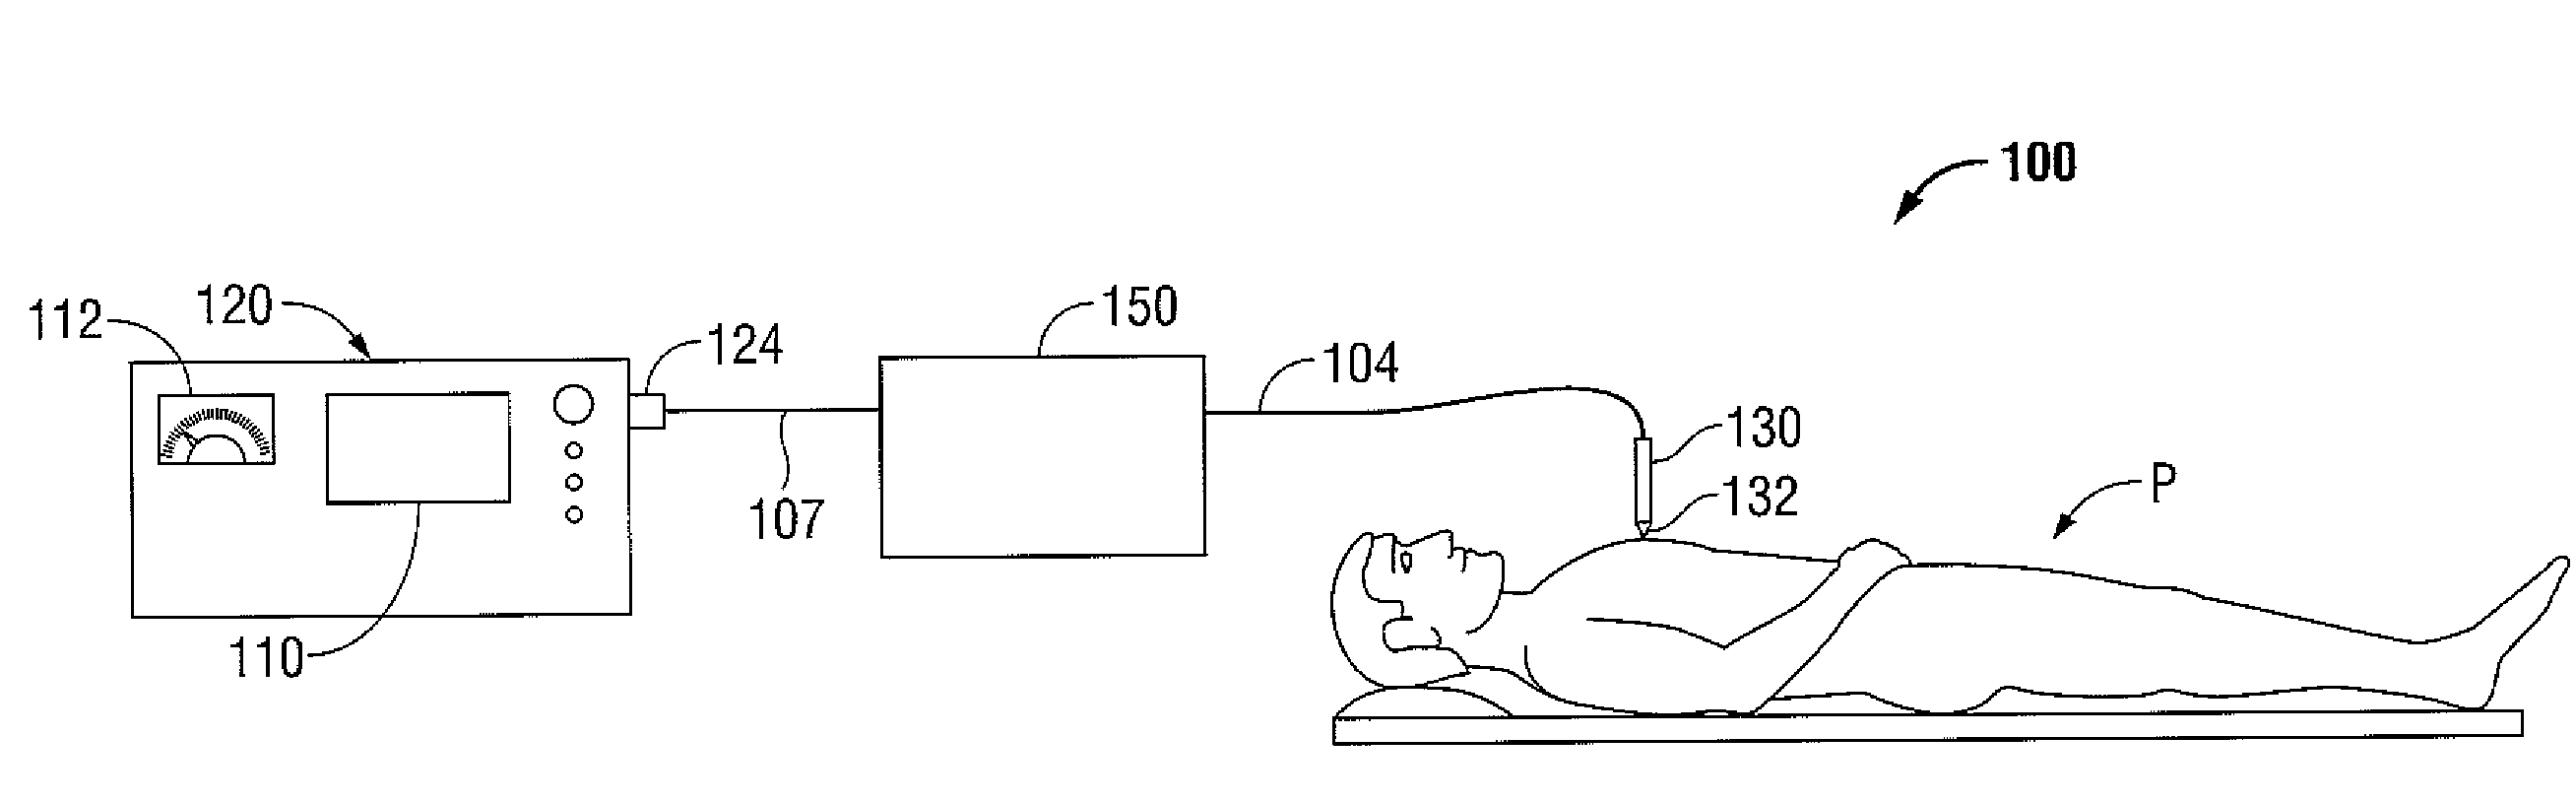 Tissue Ablation System With Phase-Controlled Channels